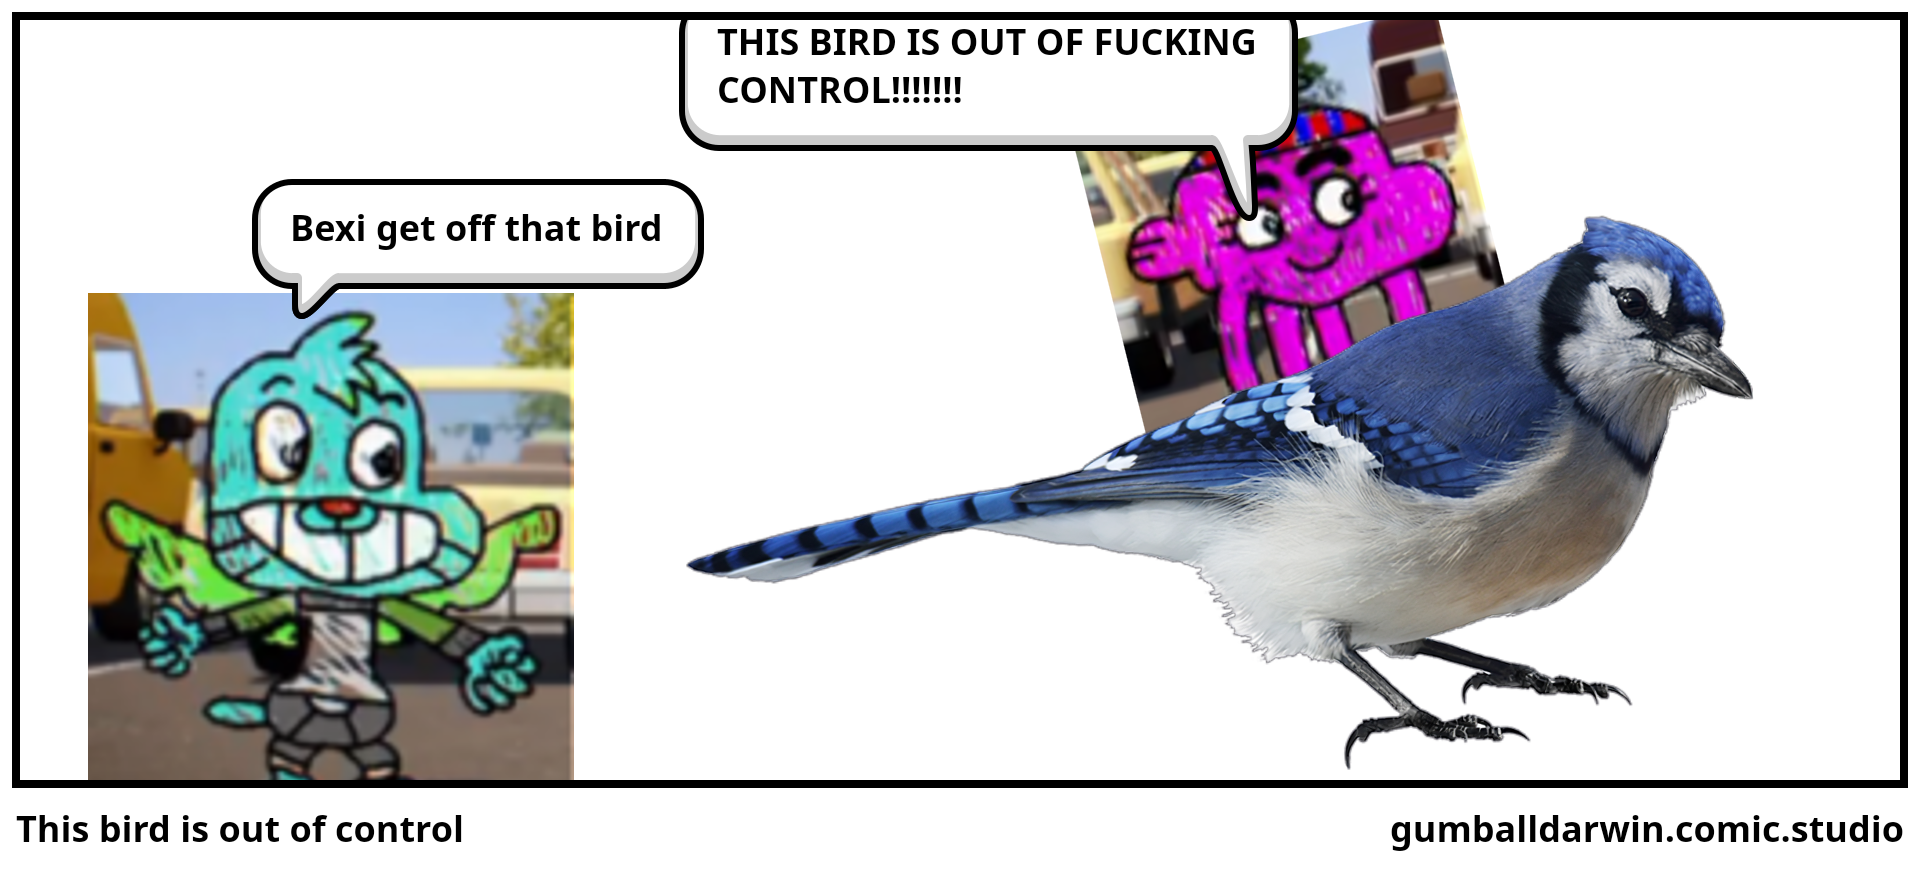 This bird is out of control